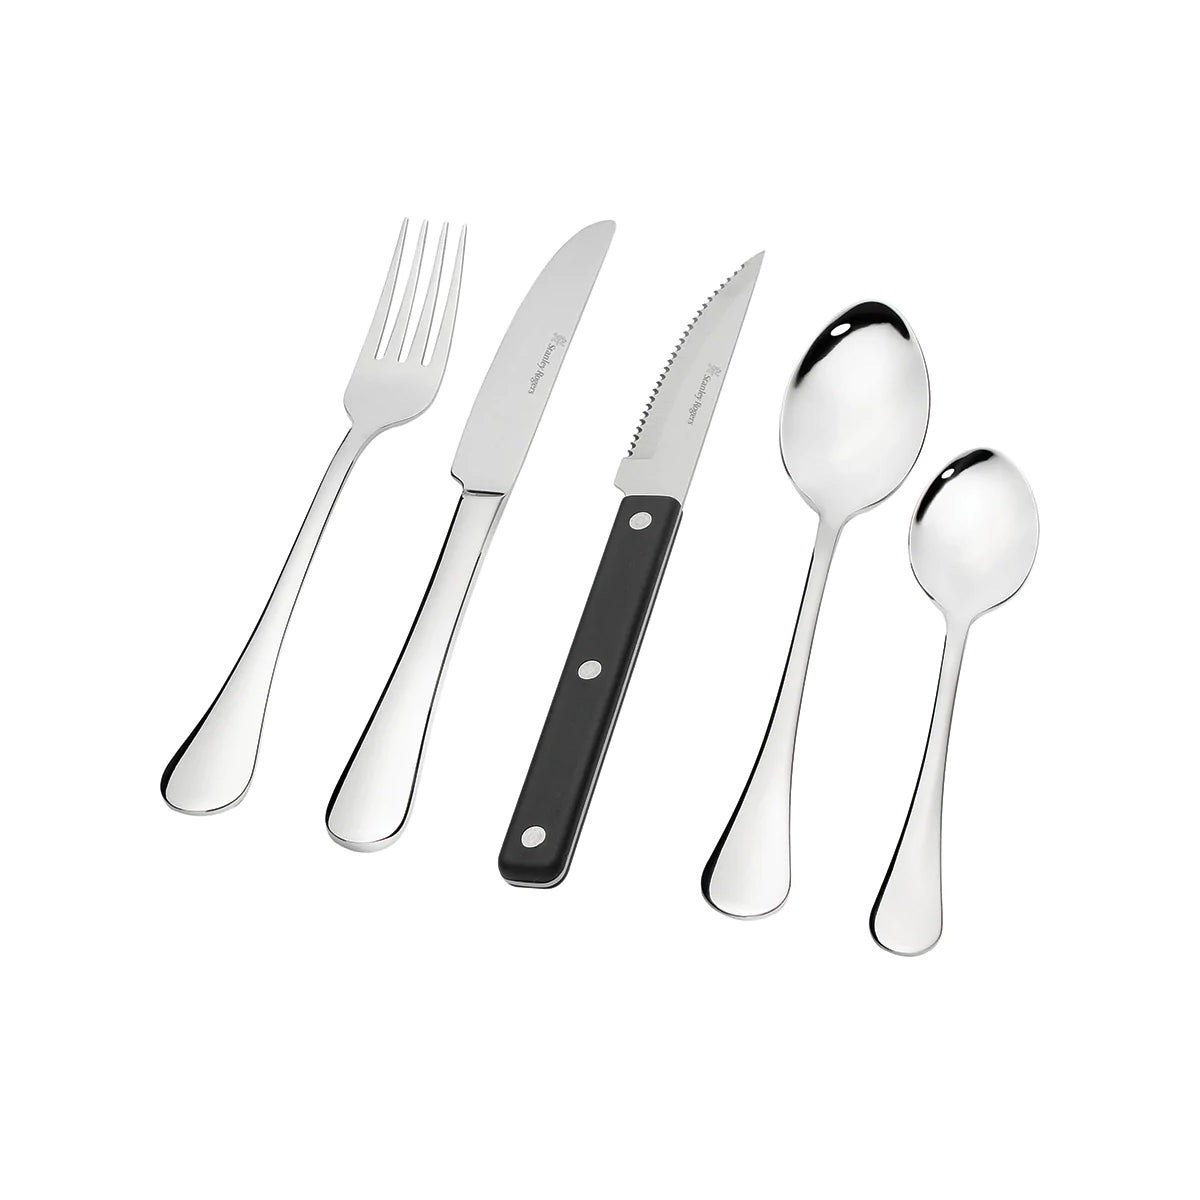 Manchester 50pc Cutlery Set